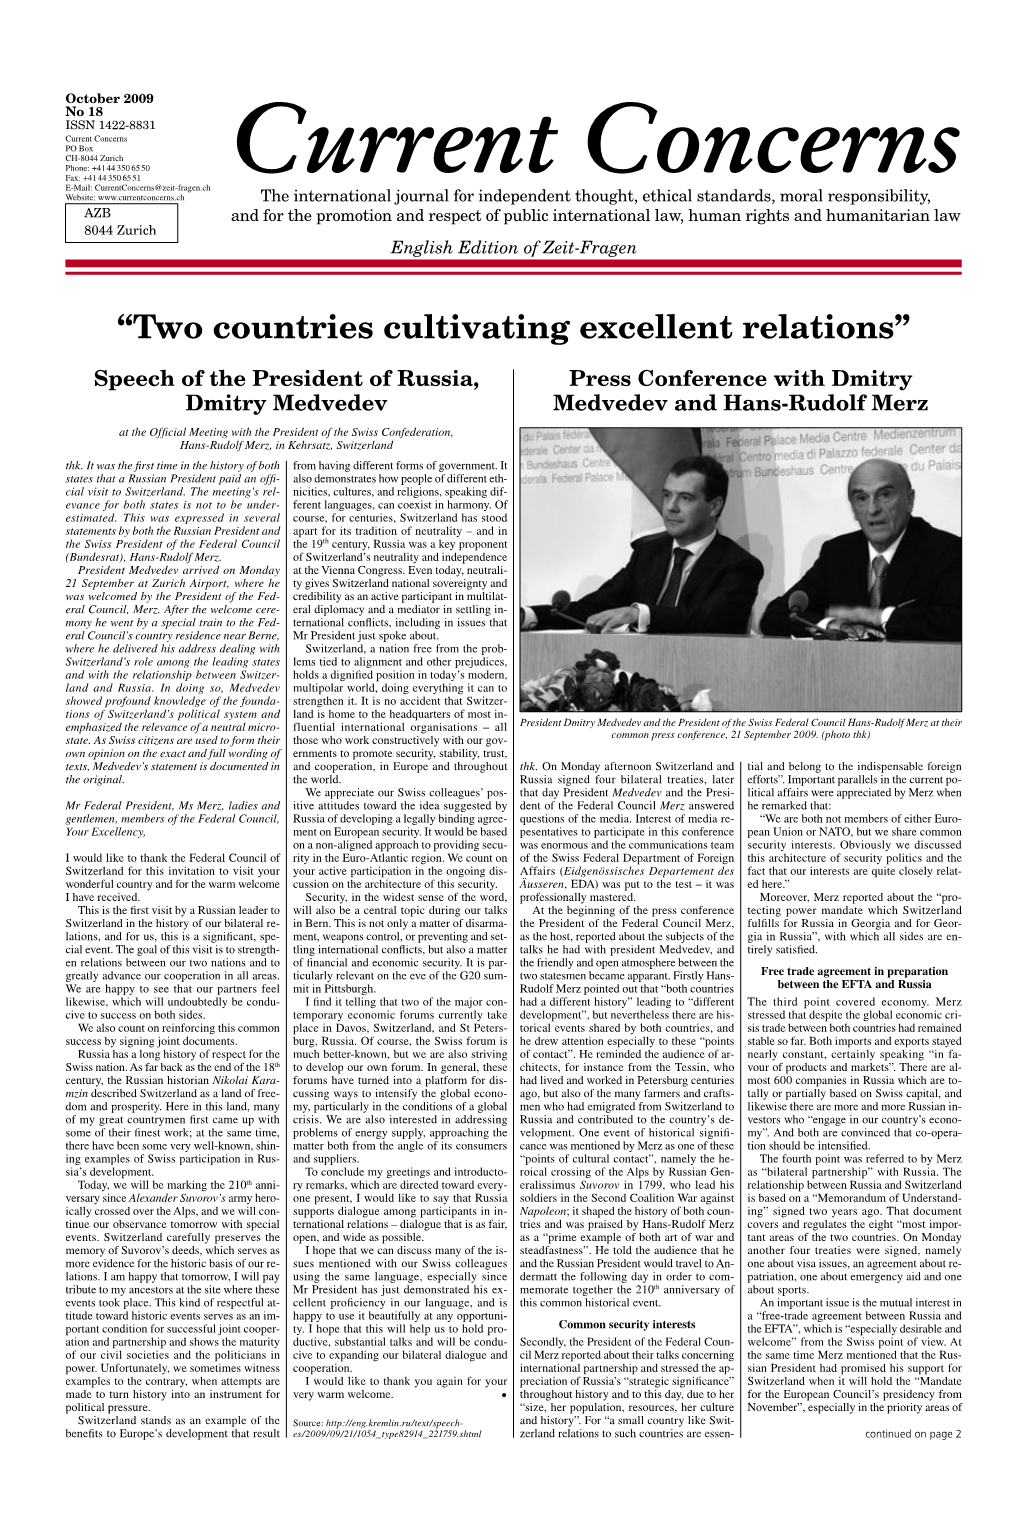 “Two Countries Cultivating Excellent Relations”